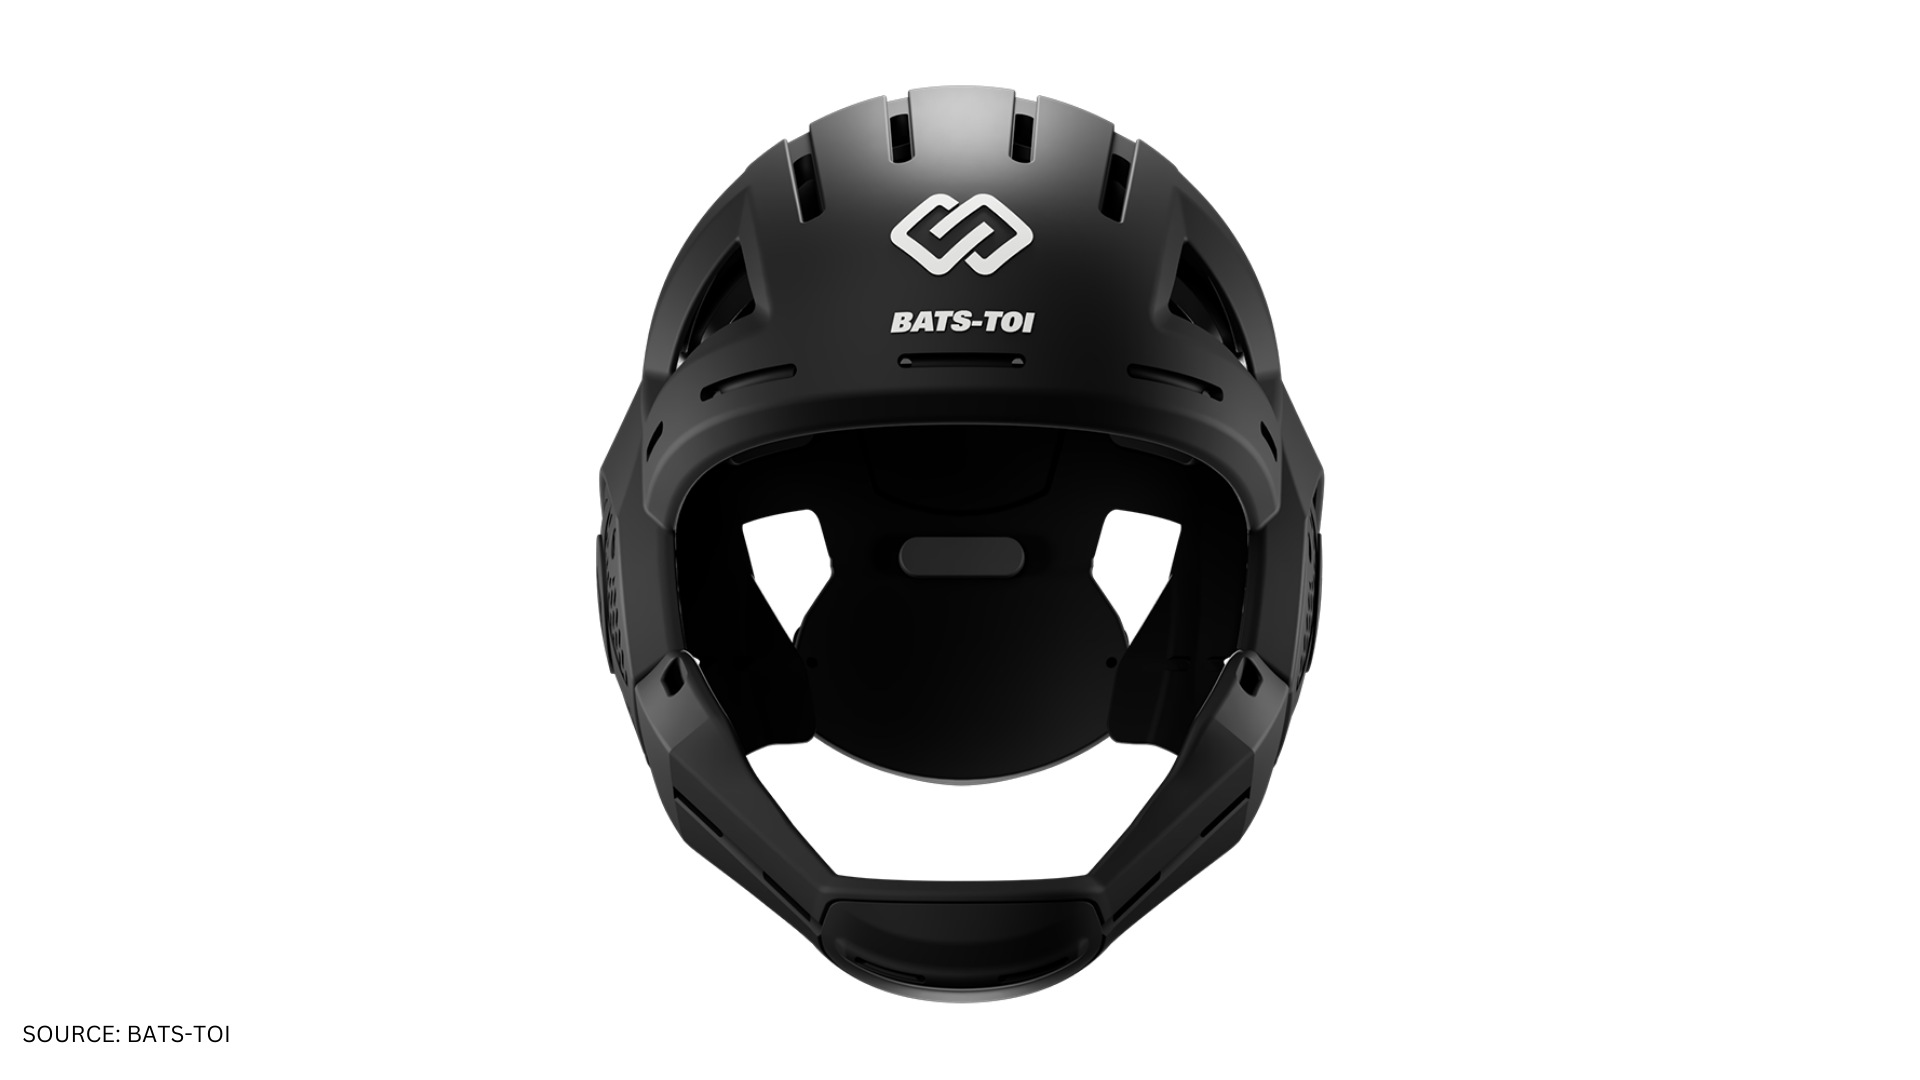 ABCorp partnering with sport technology startup BATS-TOI to manufacture The Mercado, advanced multisport headgear using 3D print technology.